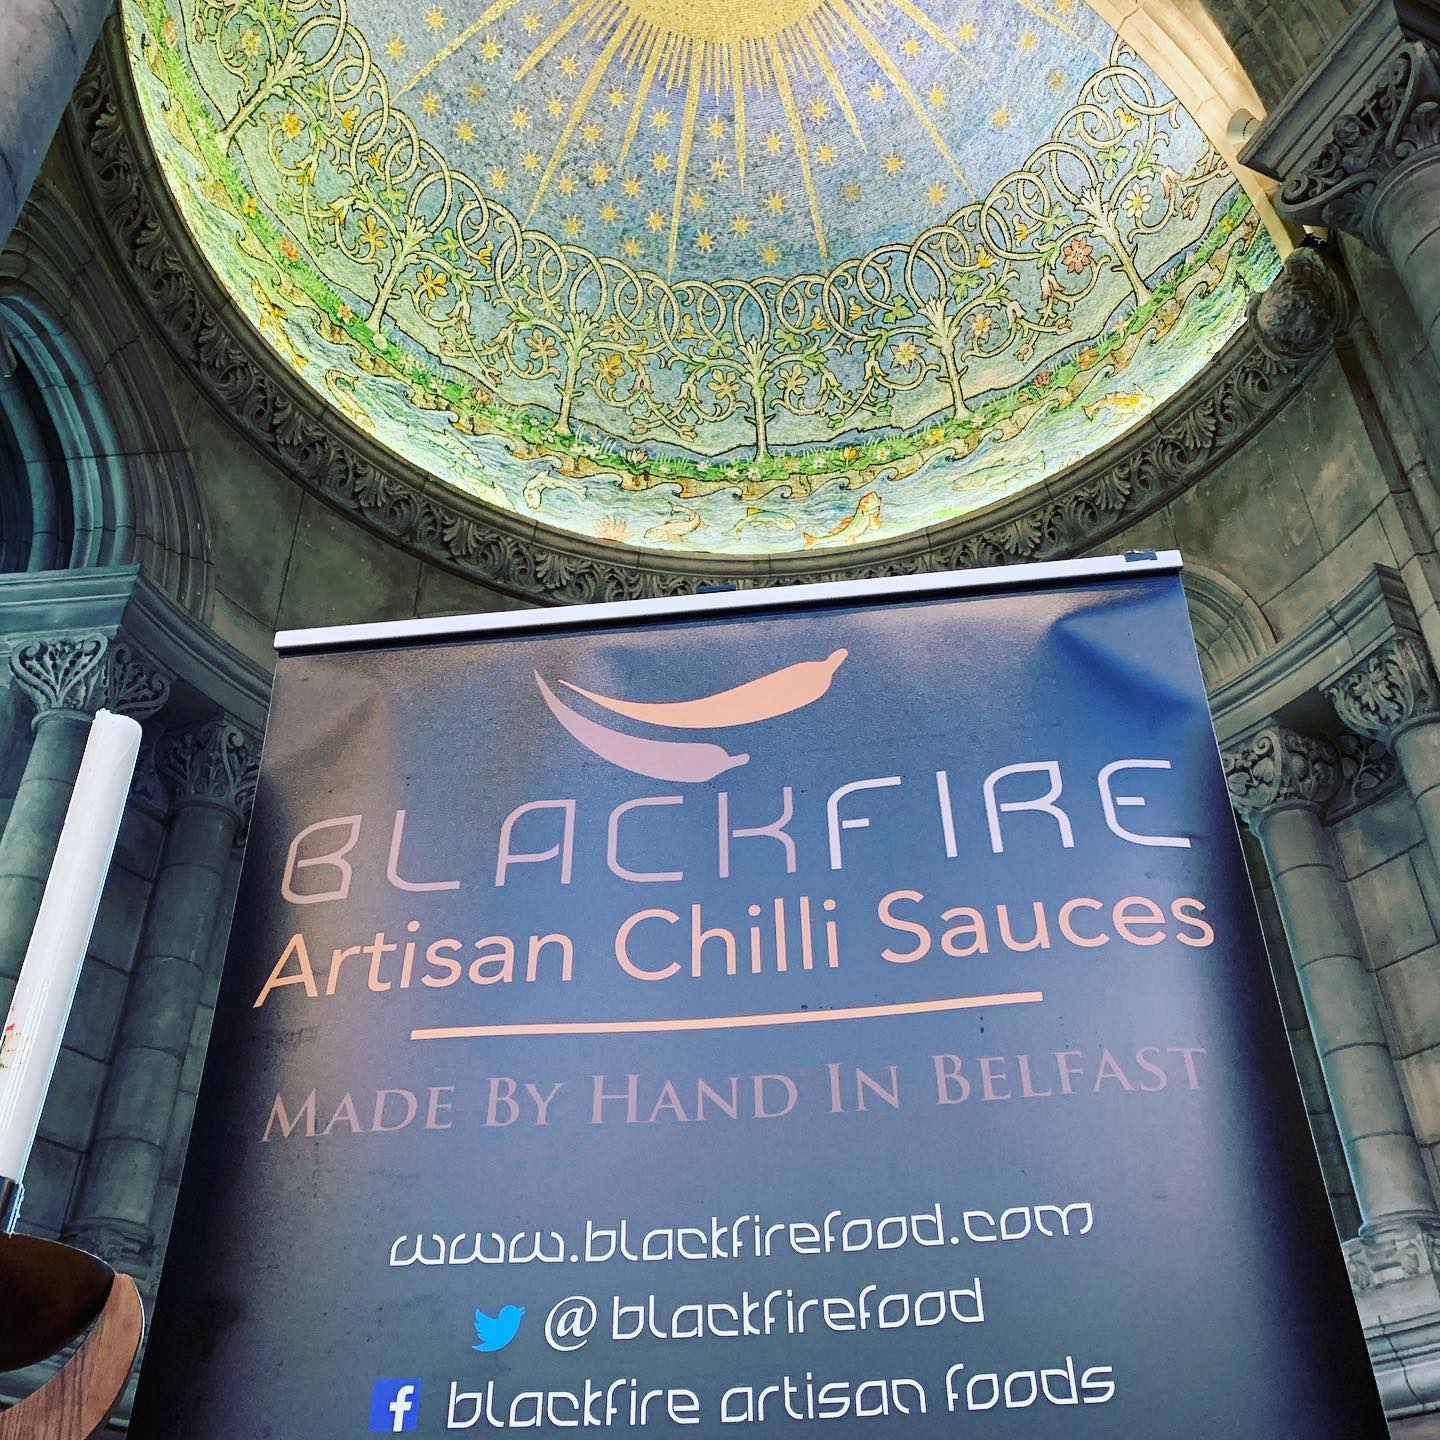 Handmade chilli sauces in the UK